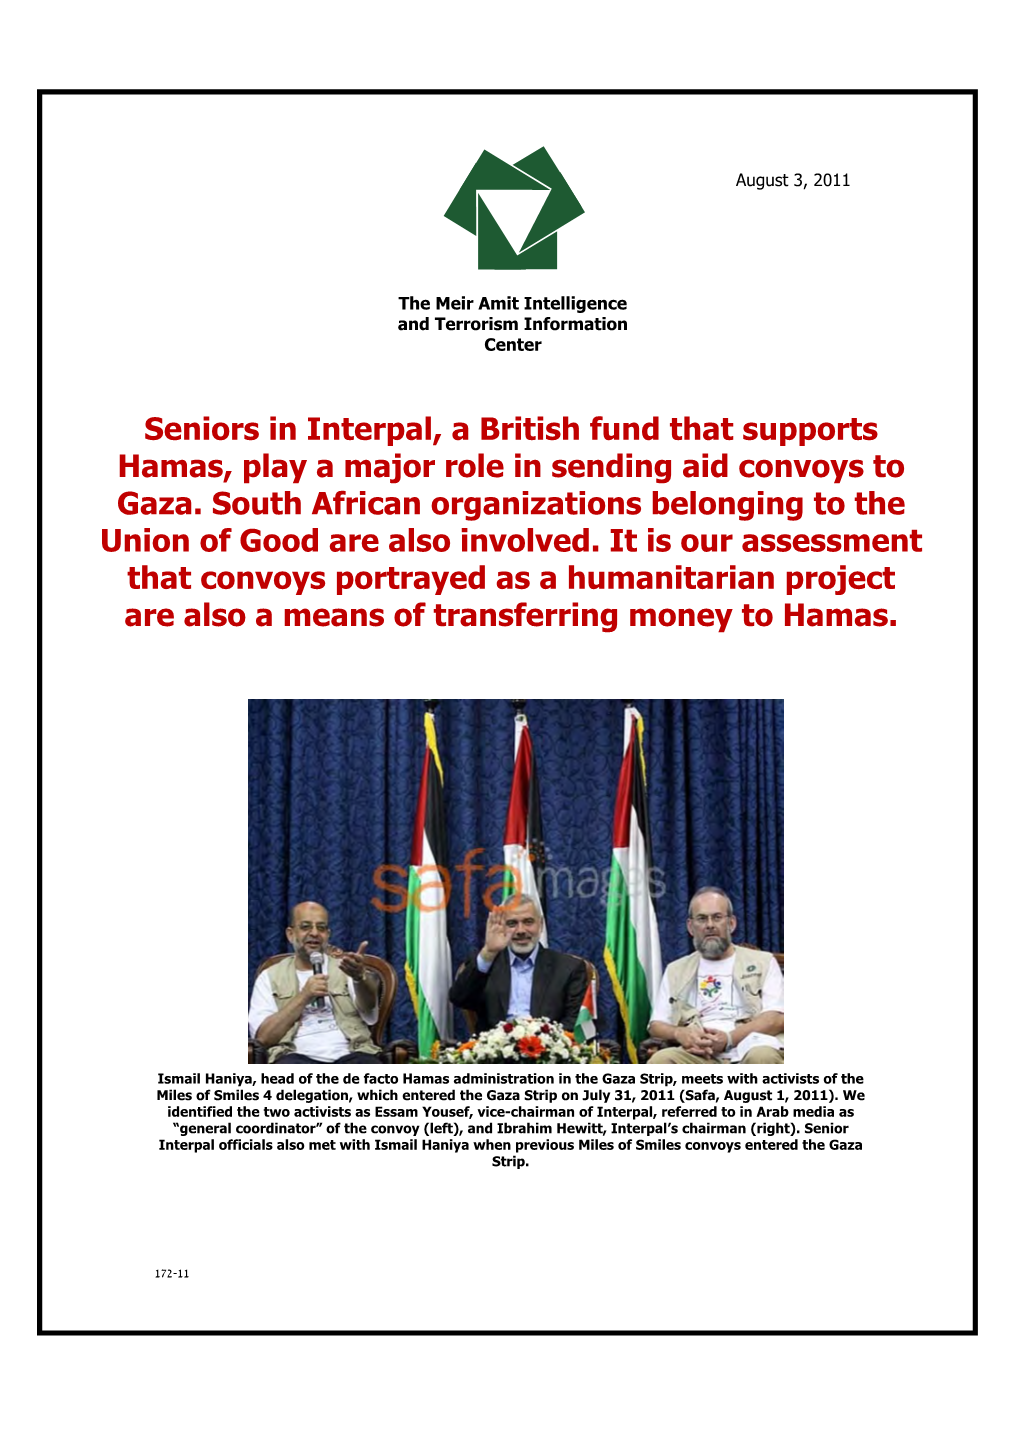 Seniors in Interpal, a British Fund That Supports Hamas, Play a Major Role in Sending Aid Convoys to Gaza